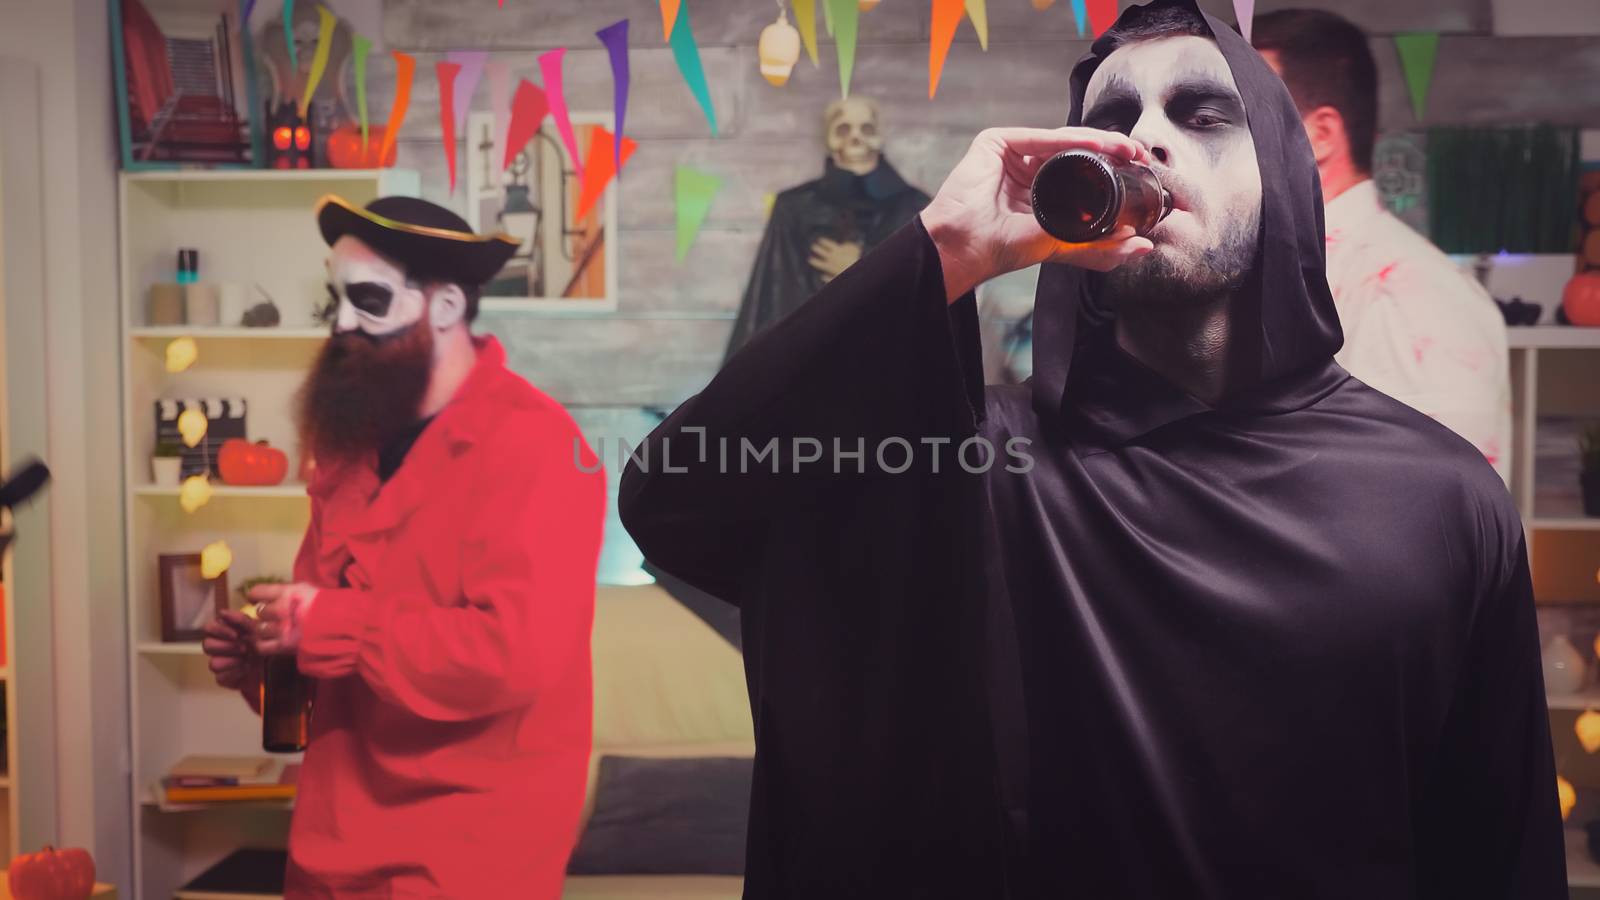 Zoom in shot of man dressed up like grim reaper drinking beer at halloween party.